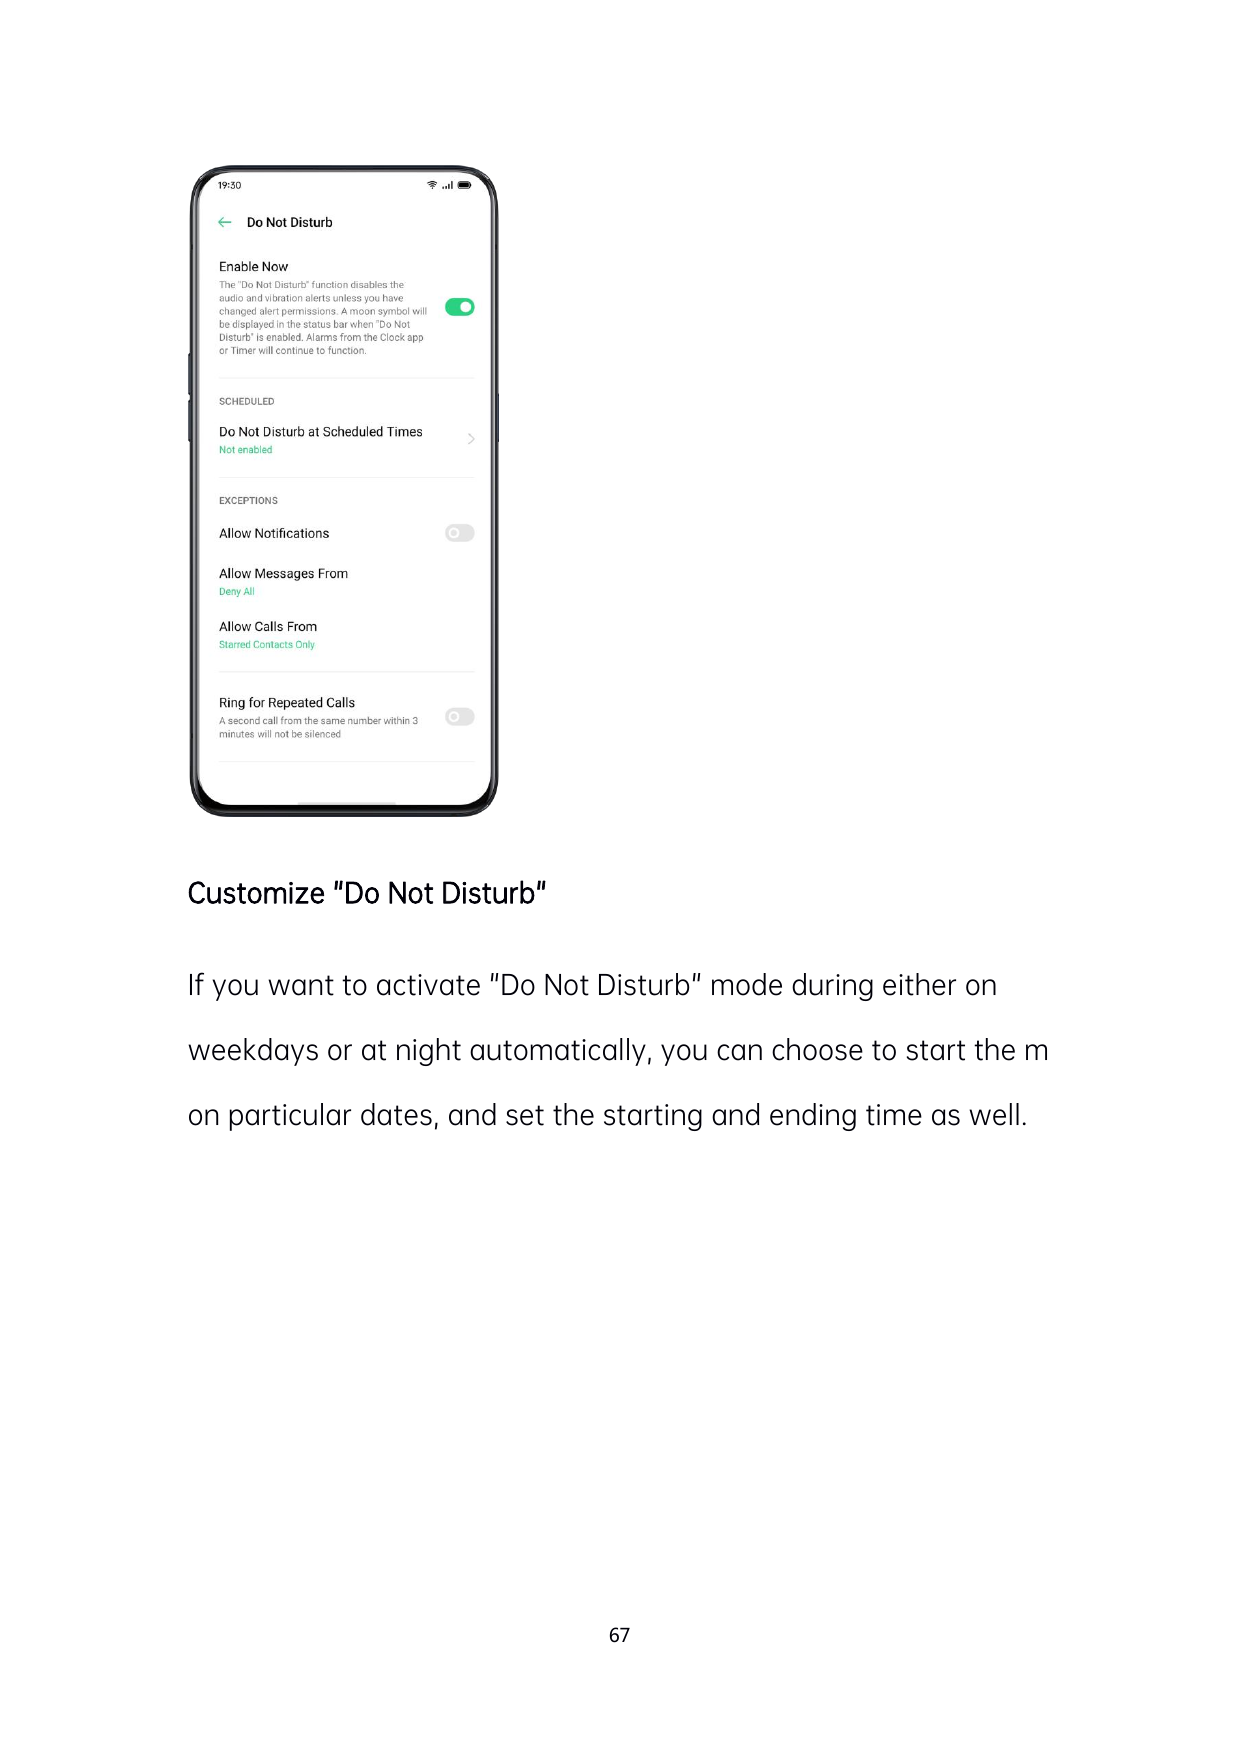 Customize "Do Not Disturb"If you want to activate "Do Not Disturb" mode during either onweekdays or at night automatically, you 